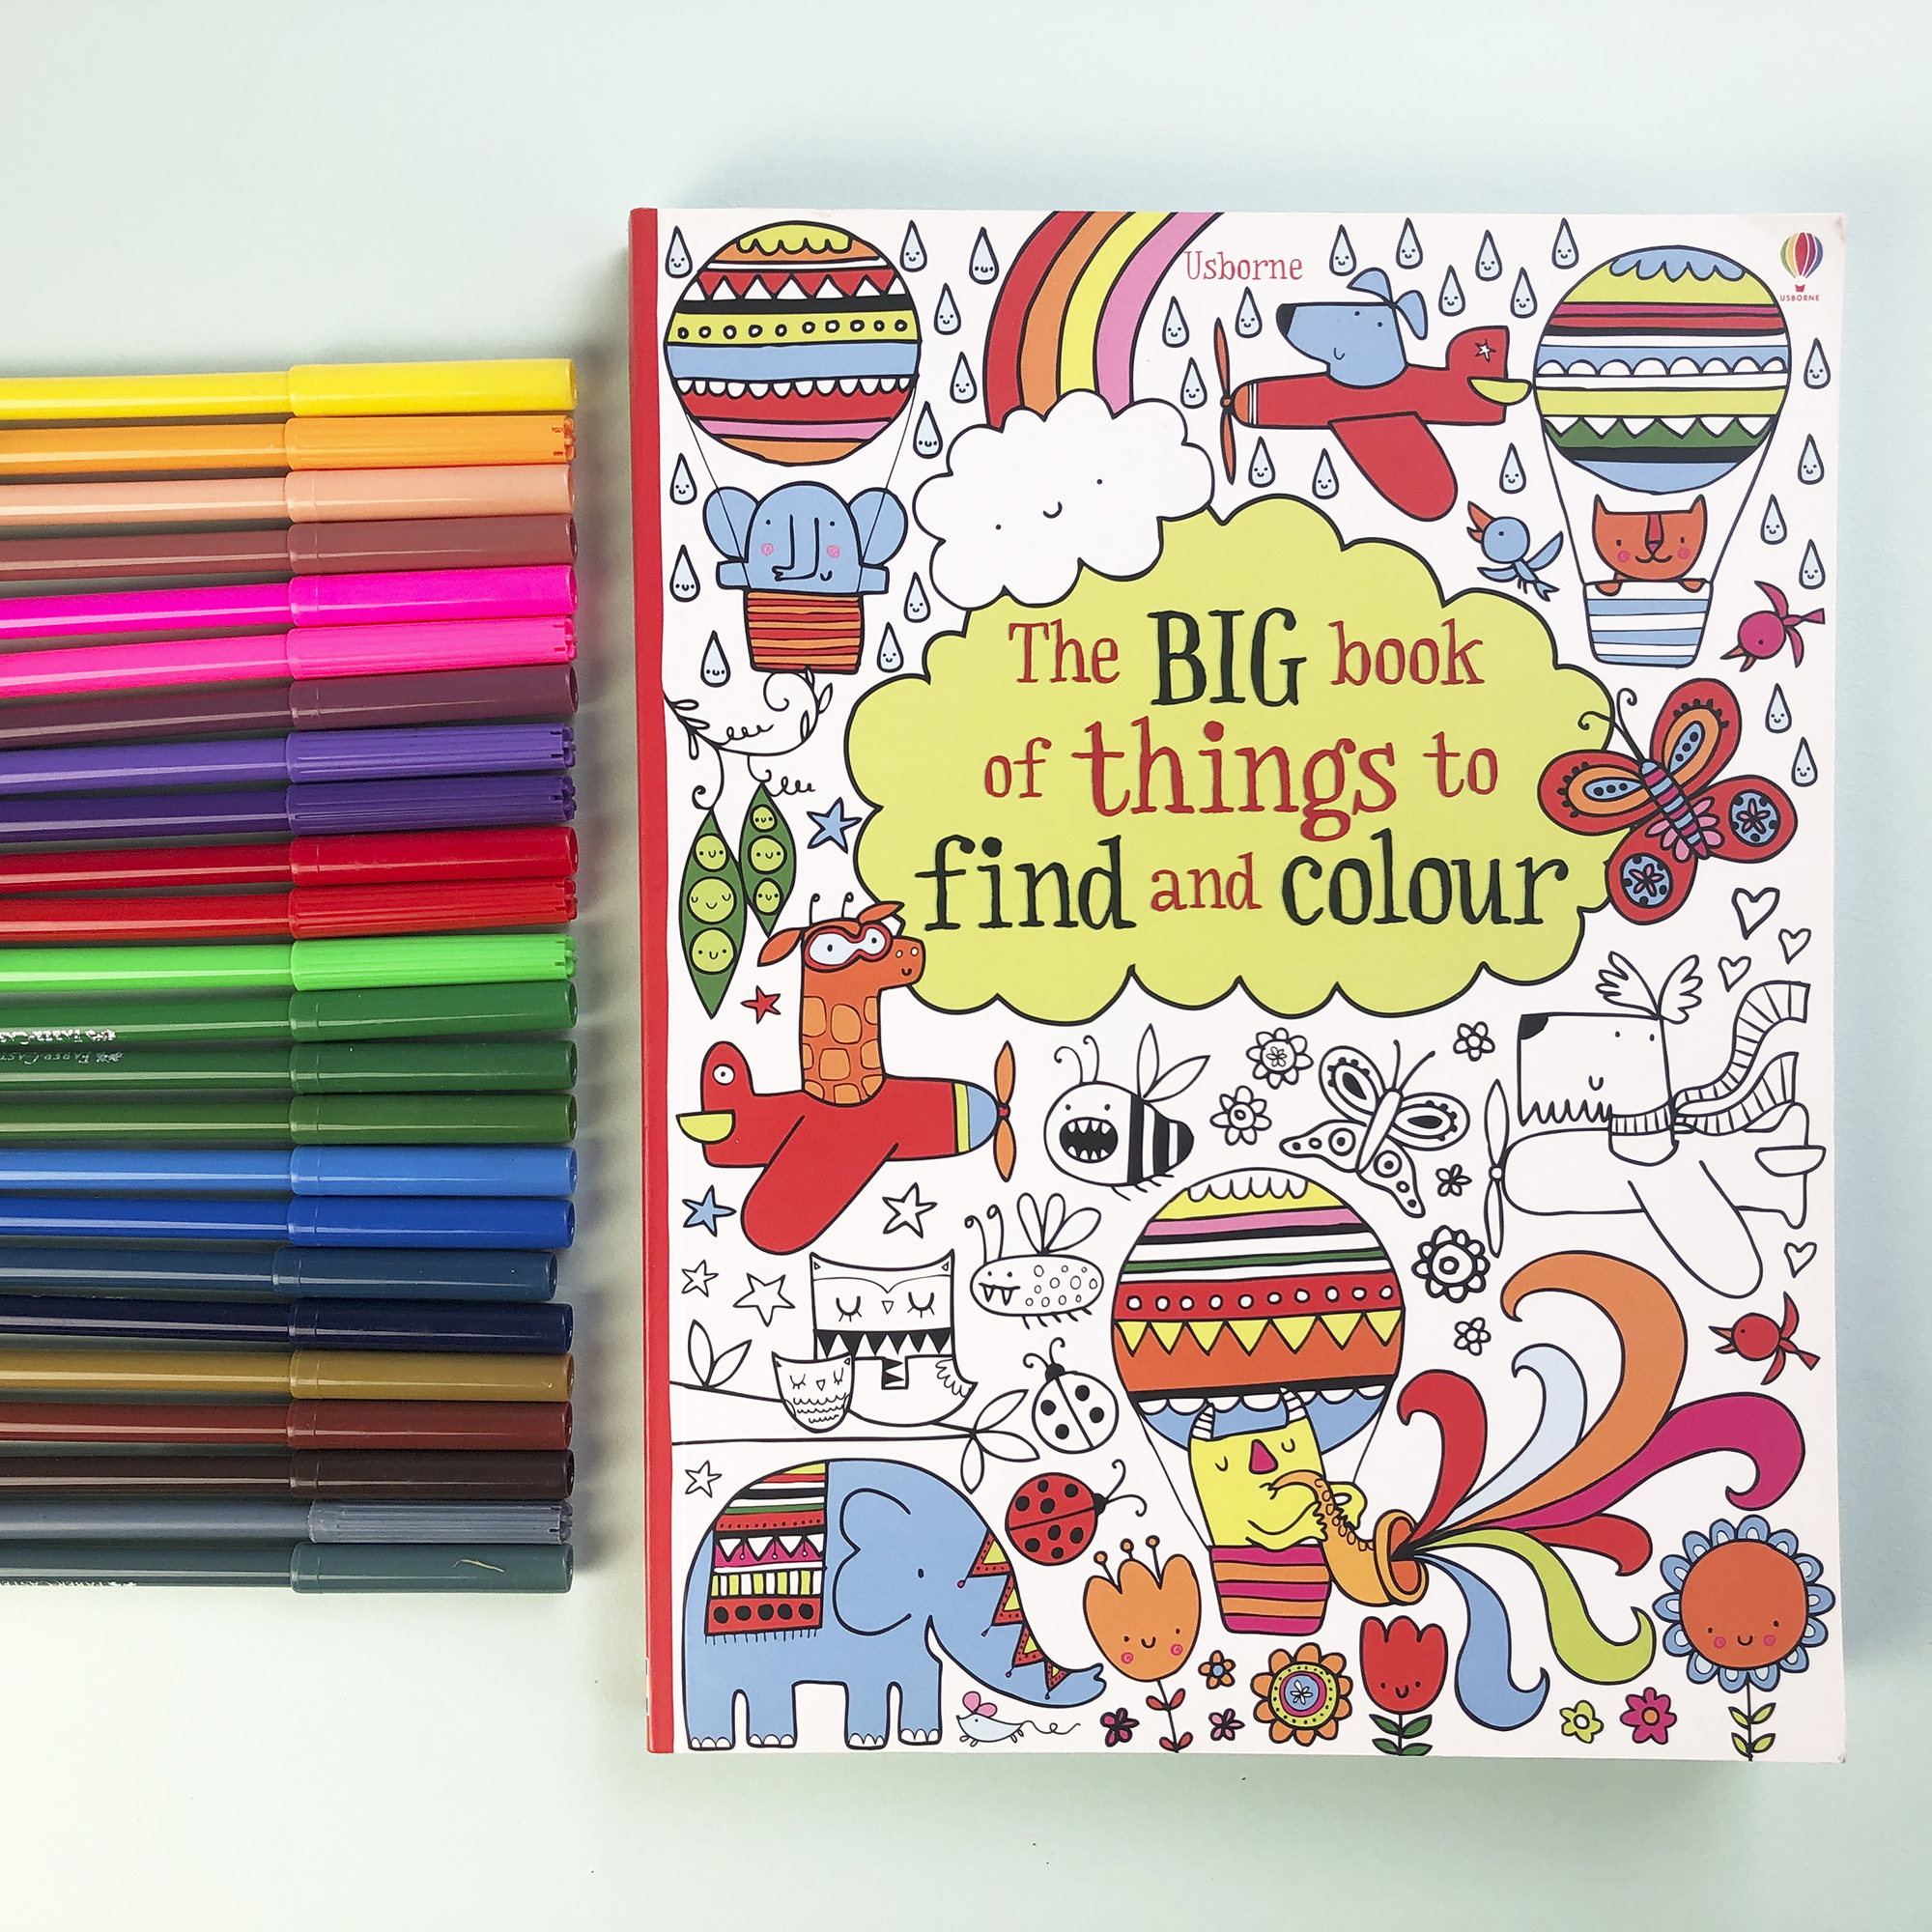 Guaranteed to keep them busy – sticker and colouring books.